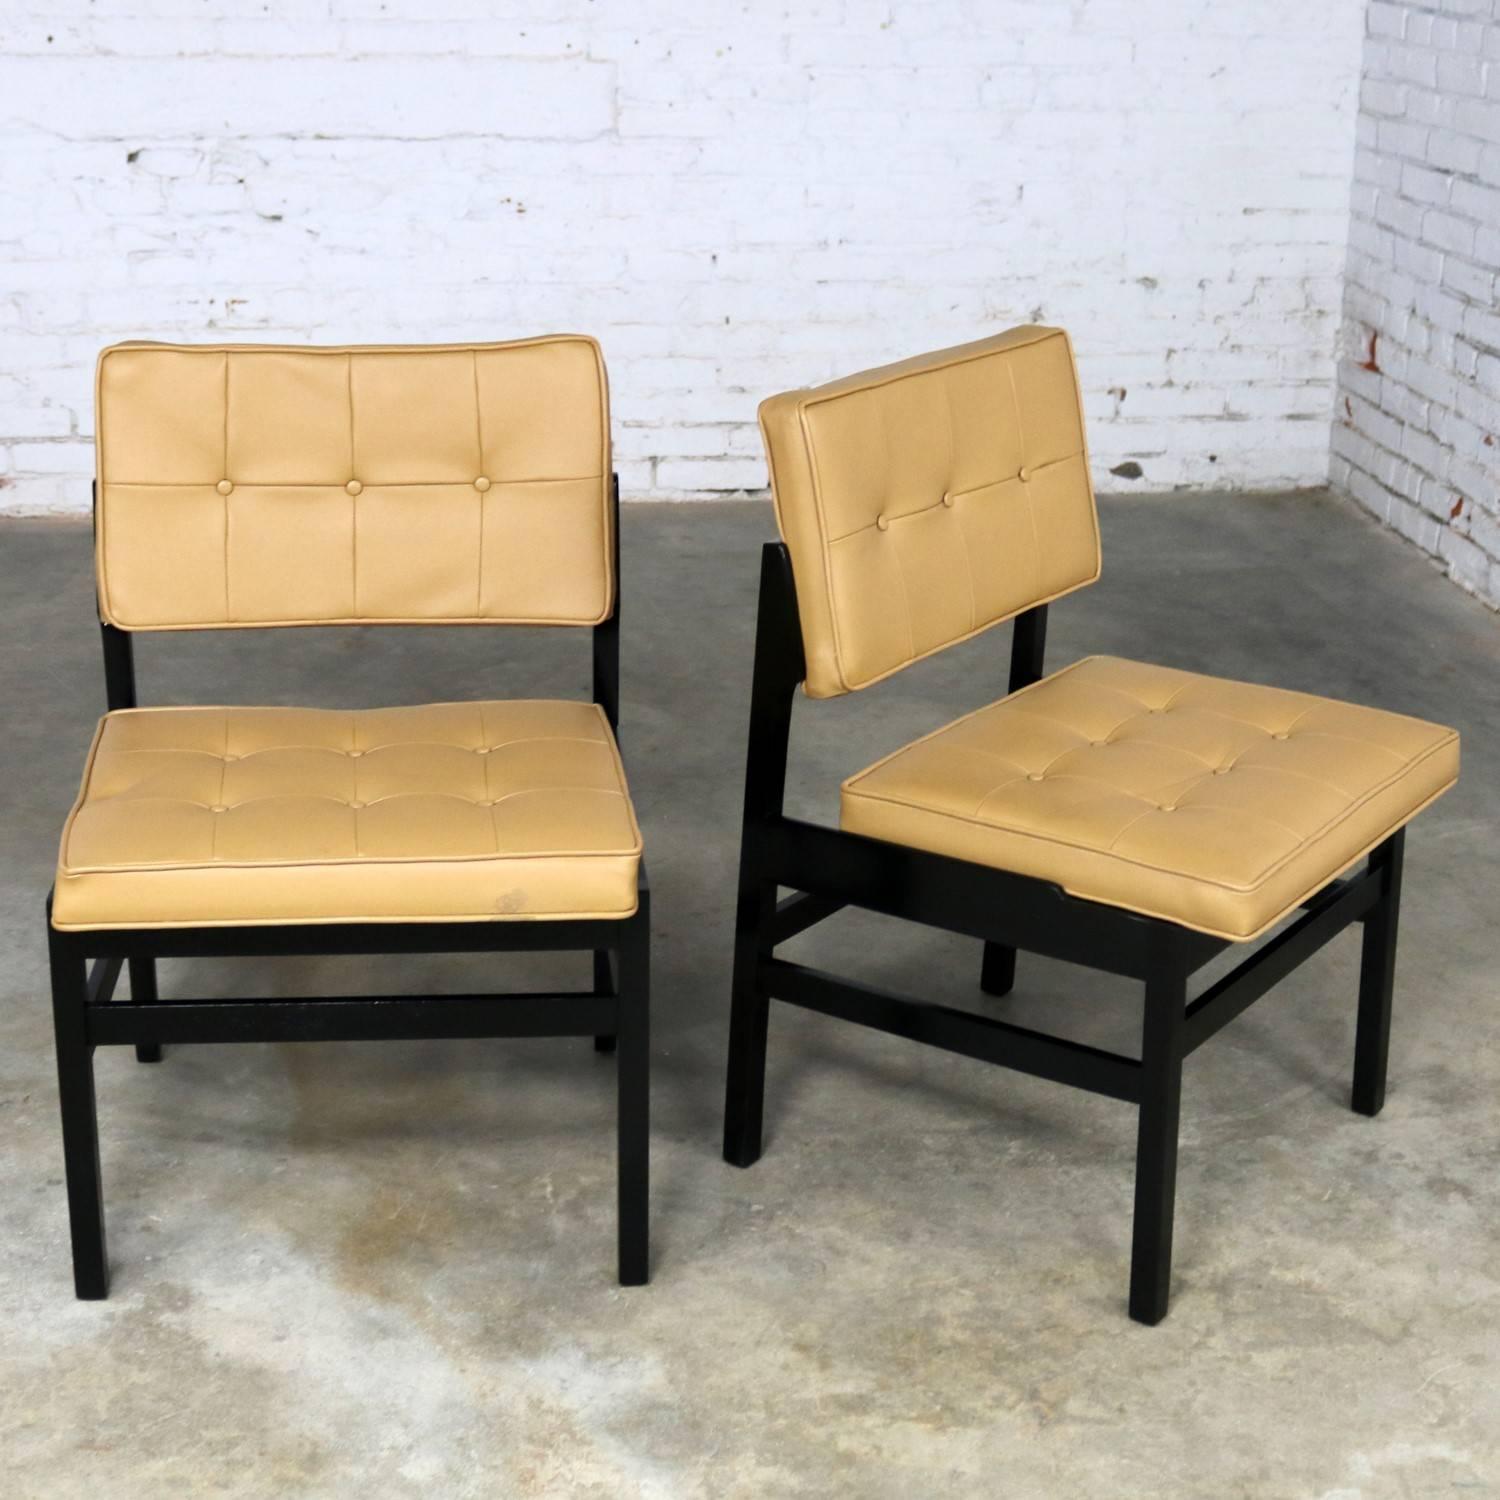 Pair of Hibriten Blackened Wood and Faux Leather Mid-Century Modern Chairs In Good Condition For Sale In Topeka, KS